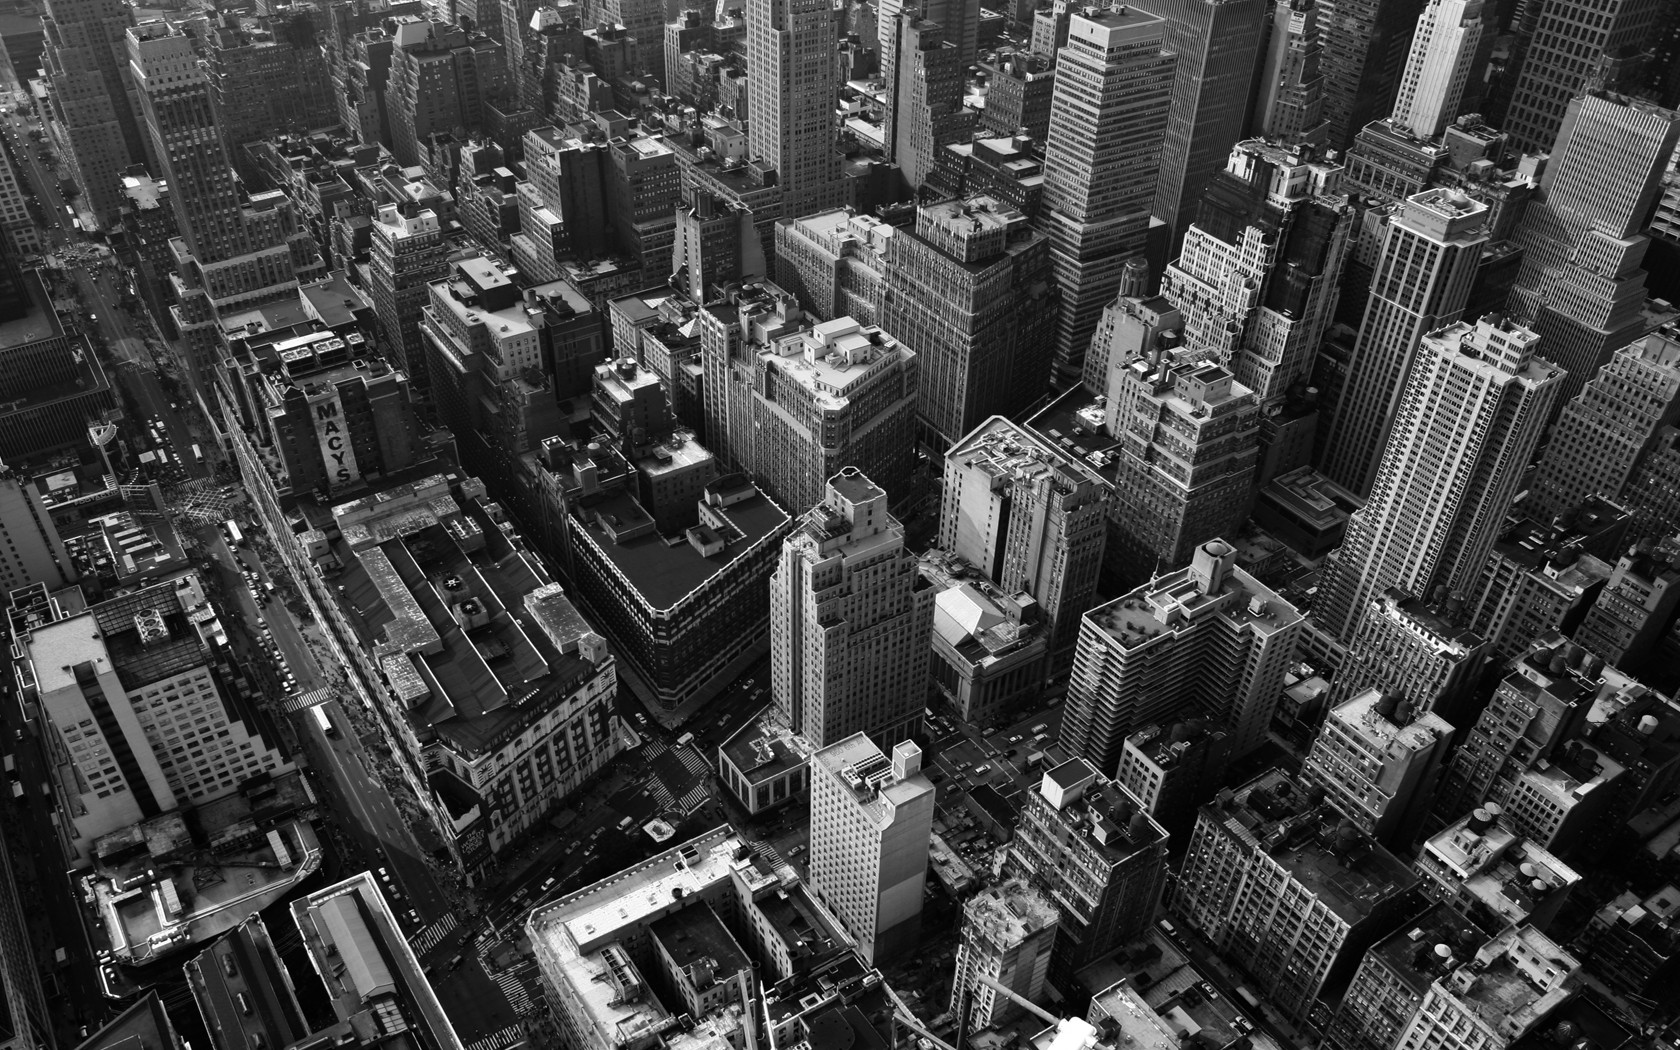 General 1680x1050 cityscape monochrome building New York City USA city aerial view